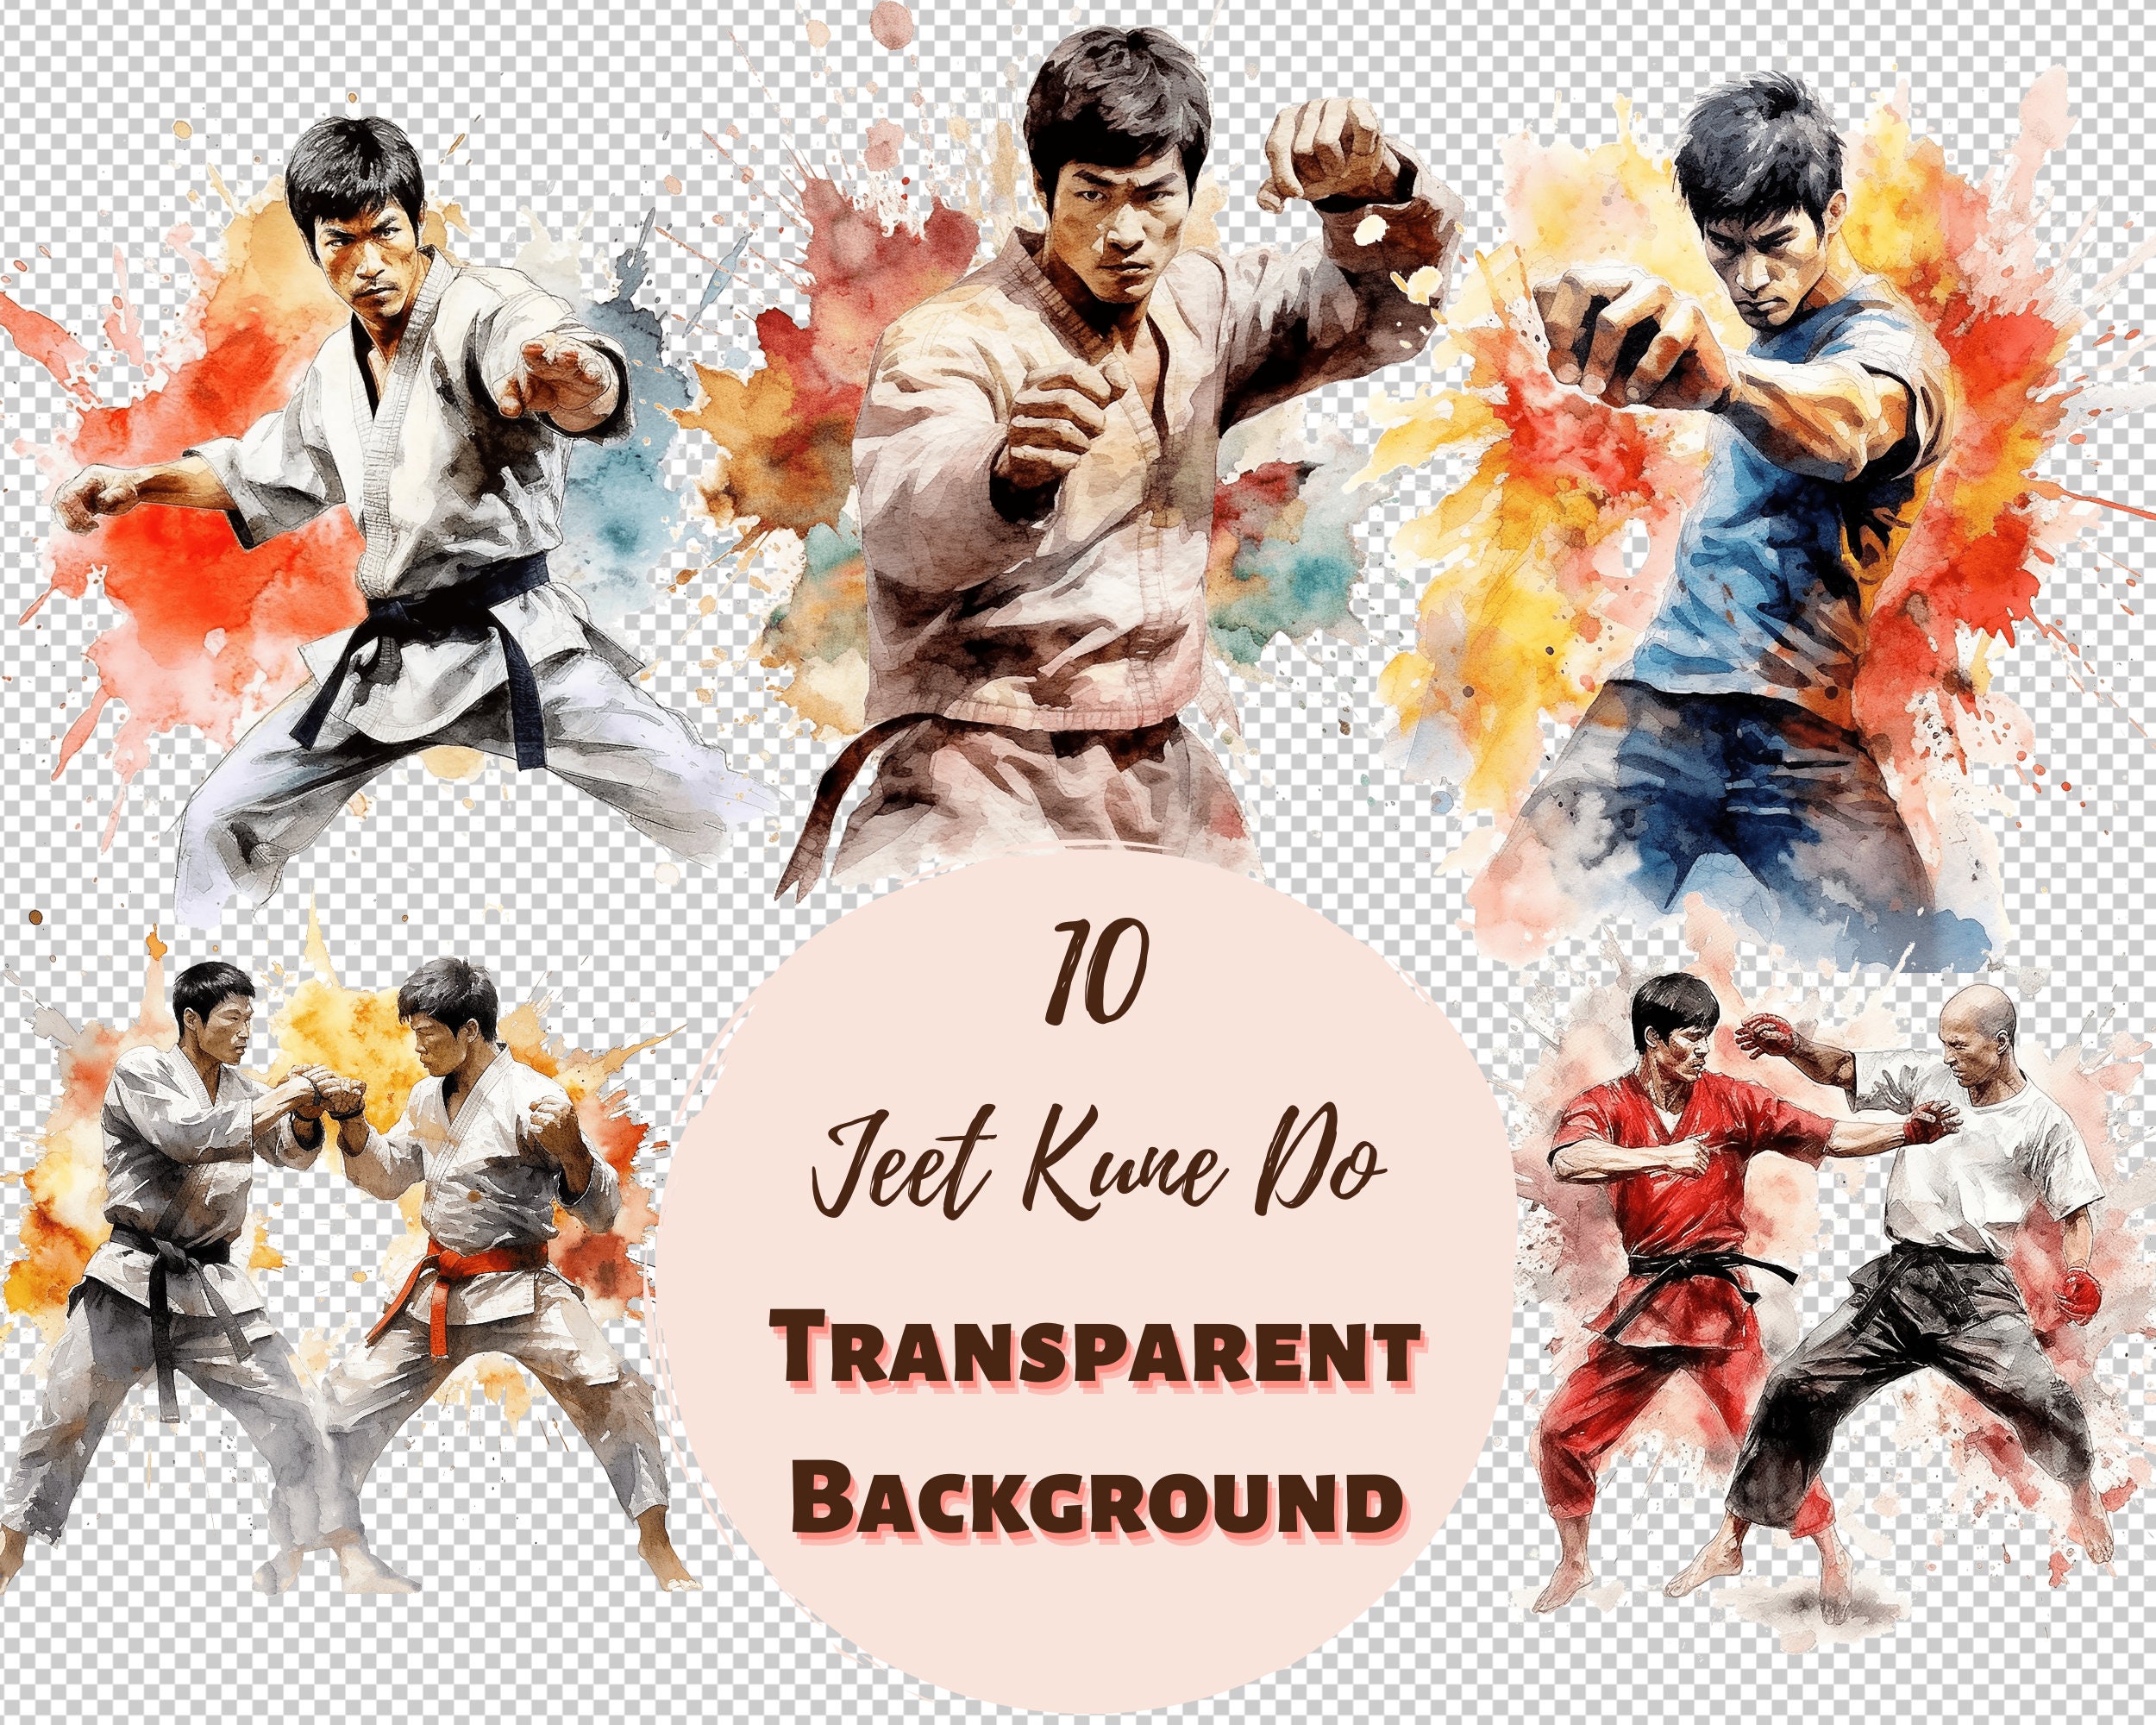 JKD Unlimited Sew On Patches